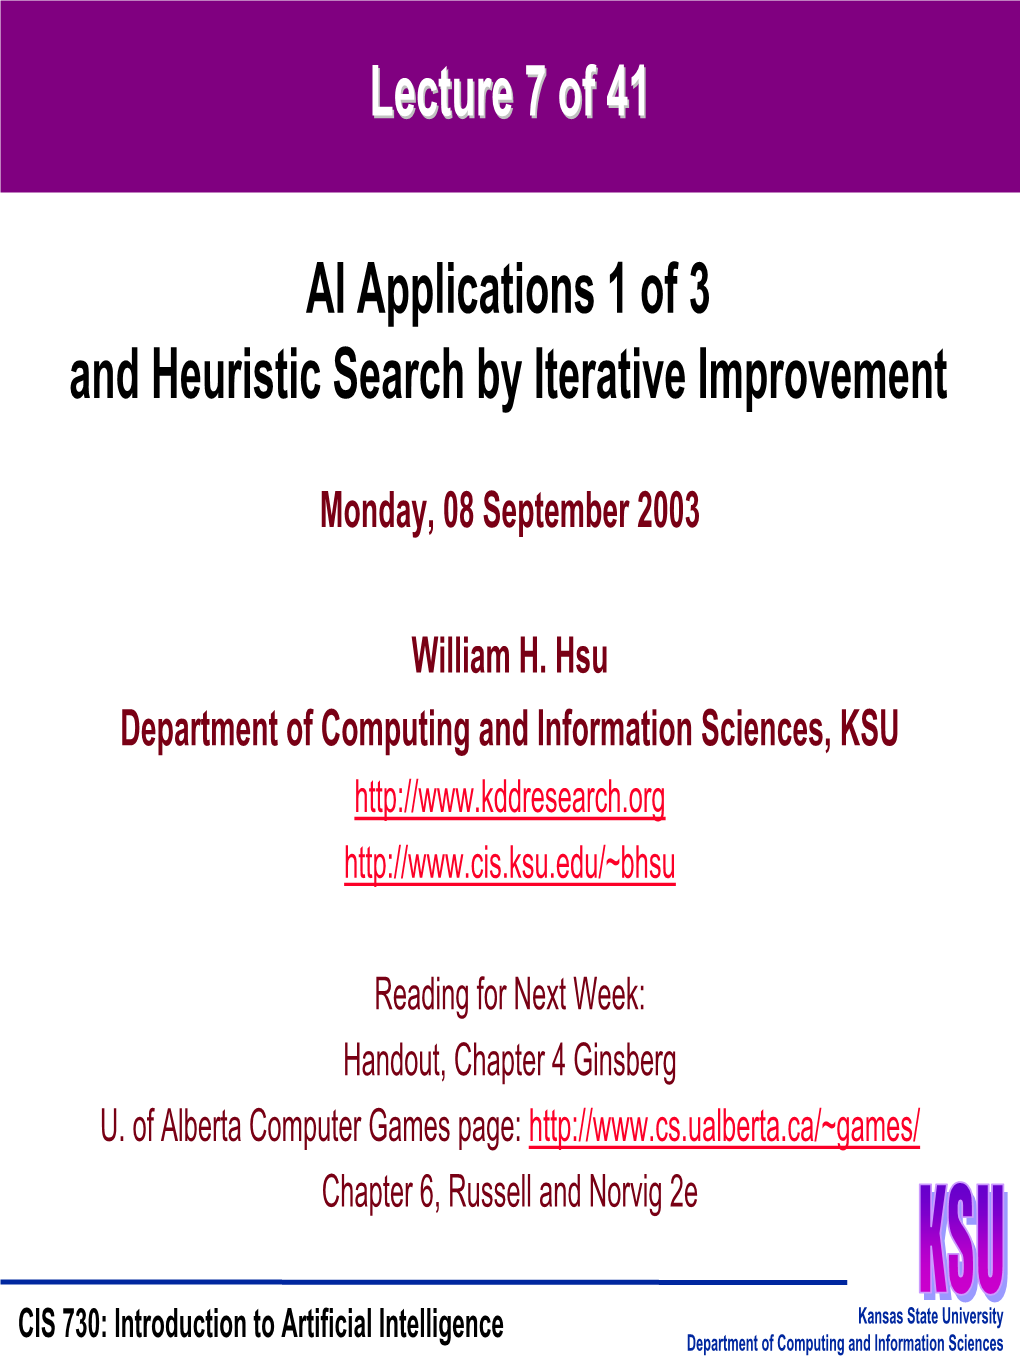 Lecture 7 of 41 AI Applications 1 of 3 and Heuristic Search by Iterative Improvement